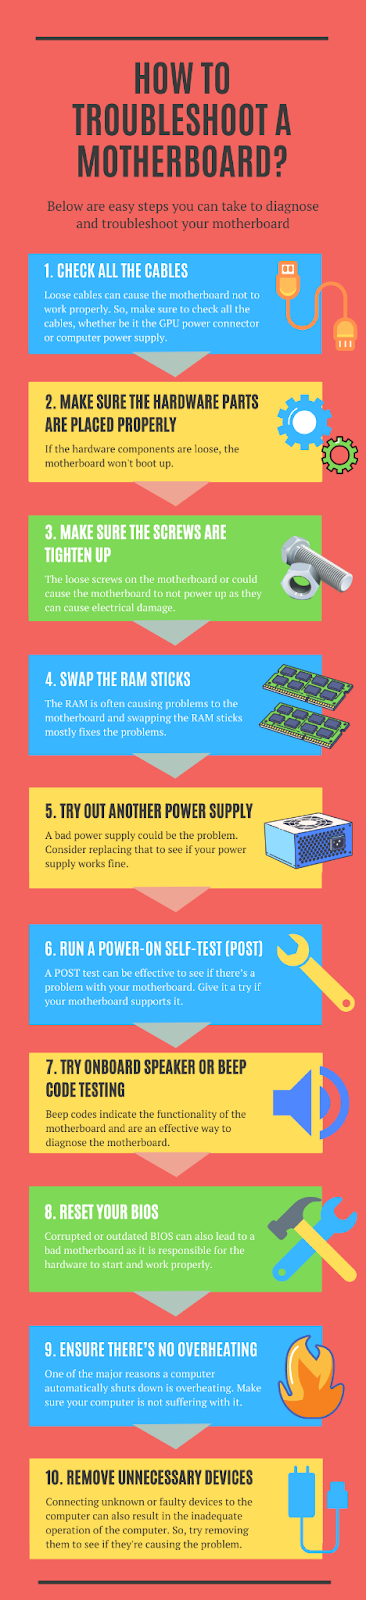 How to Troubleshoot a Motherboard Infographic